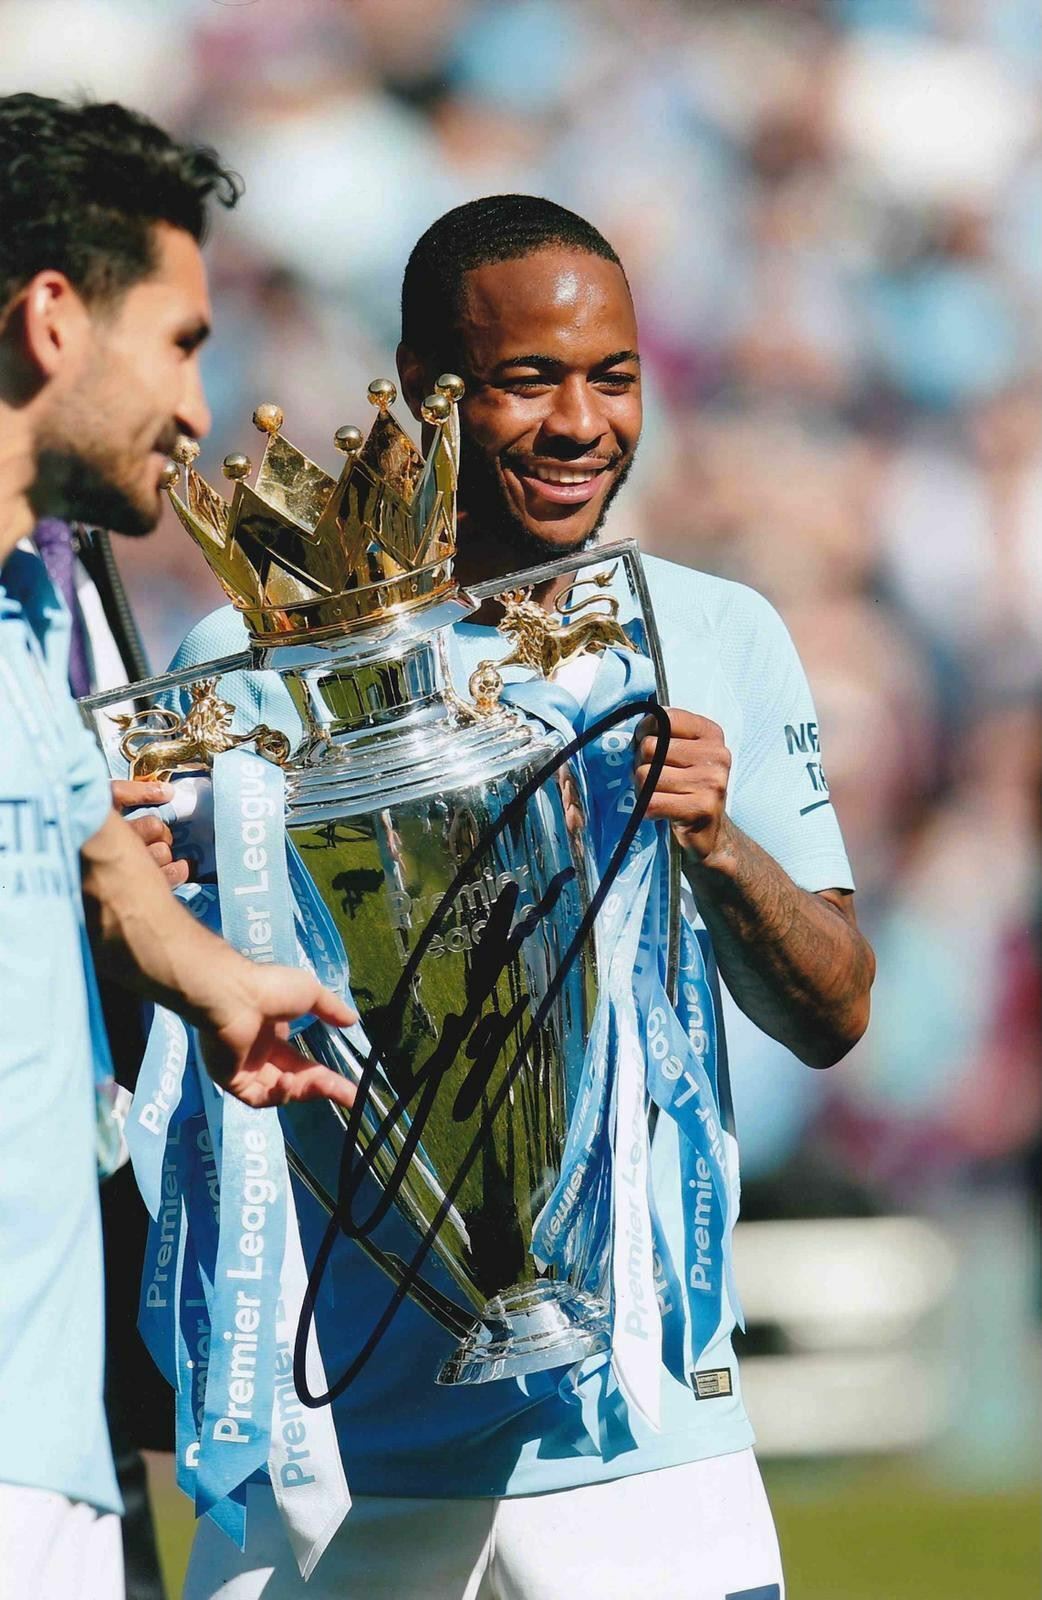 RAHEEM STERLING SIGNED MANCHESTER CITY 12X8 CHAMPIONS PHOTO (AFTAL COA)